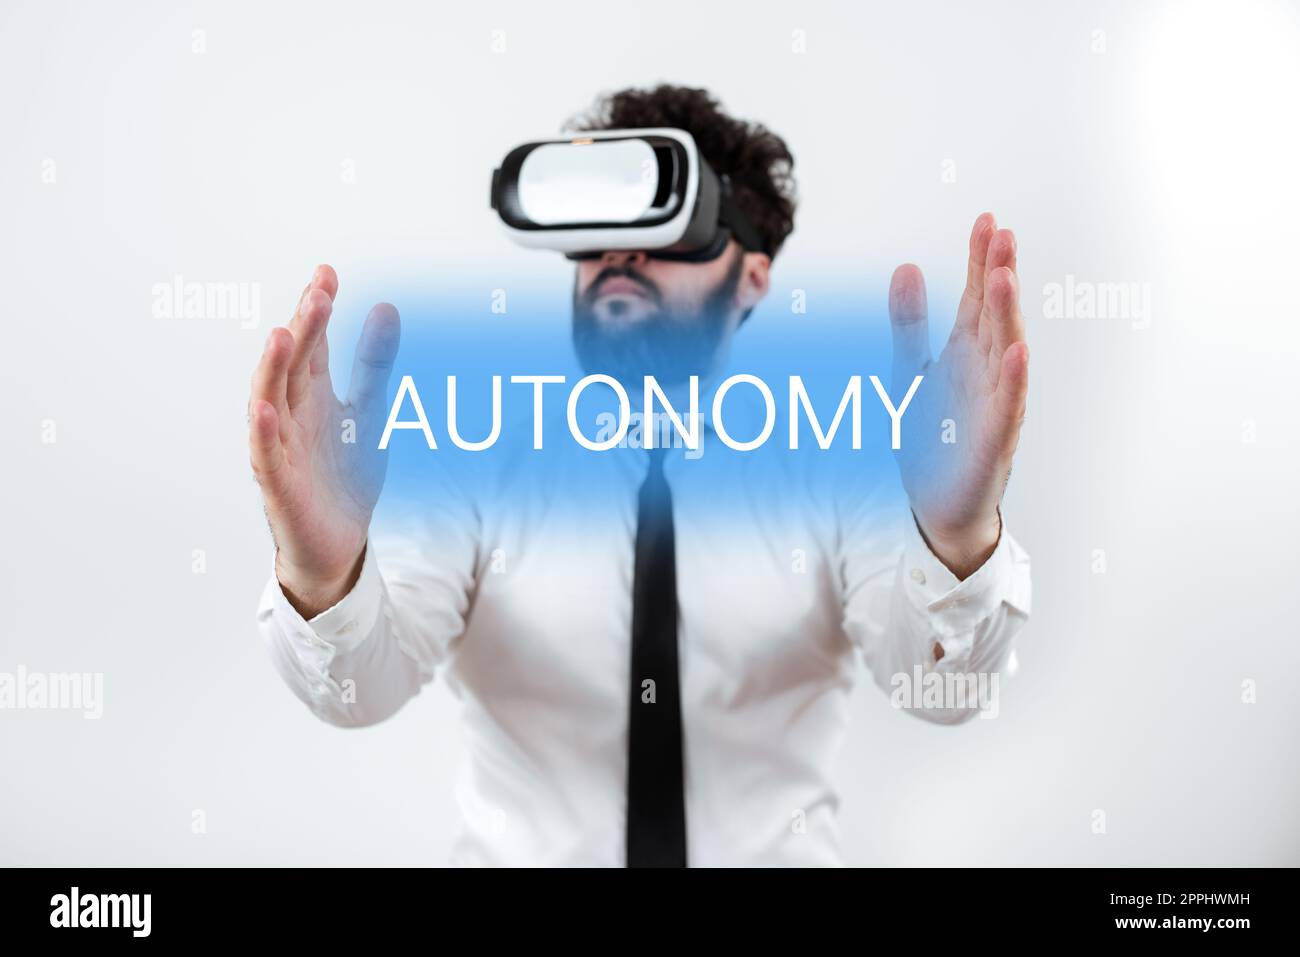 Sign displaying Autonomy. Business overview vehicle that can guide itself without human conduction Stock Photo